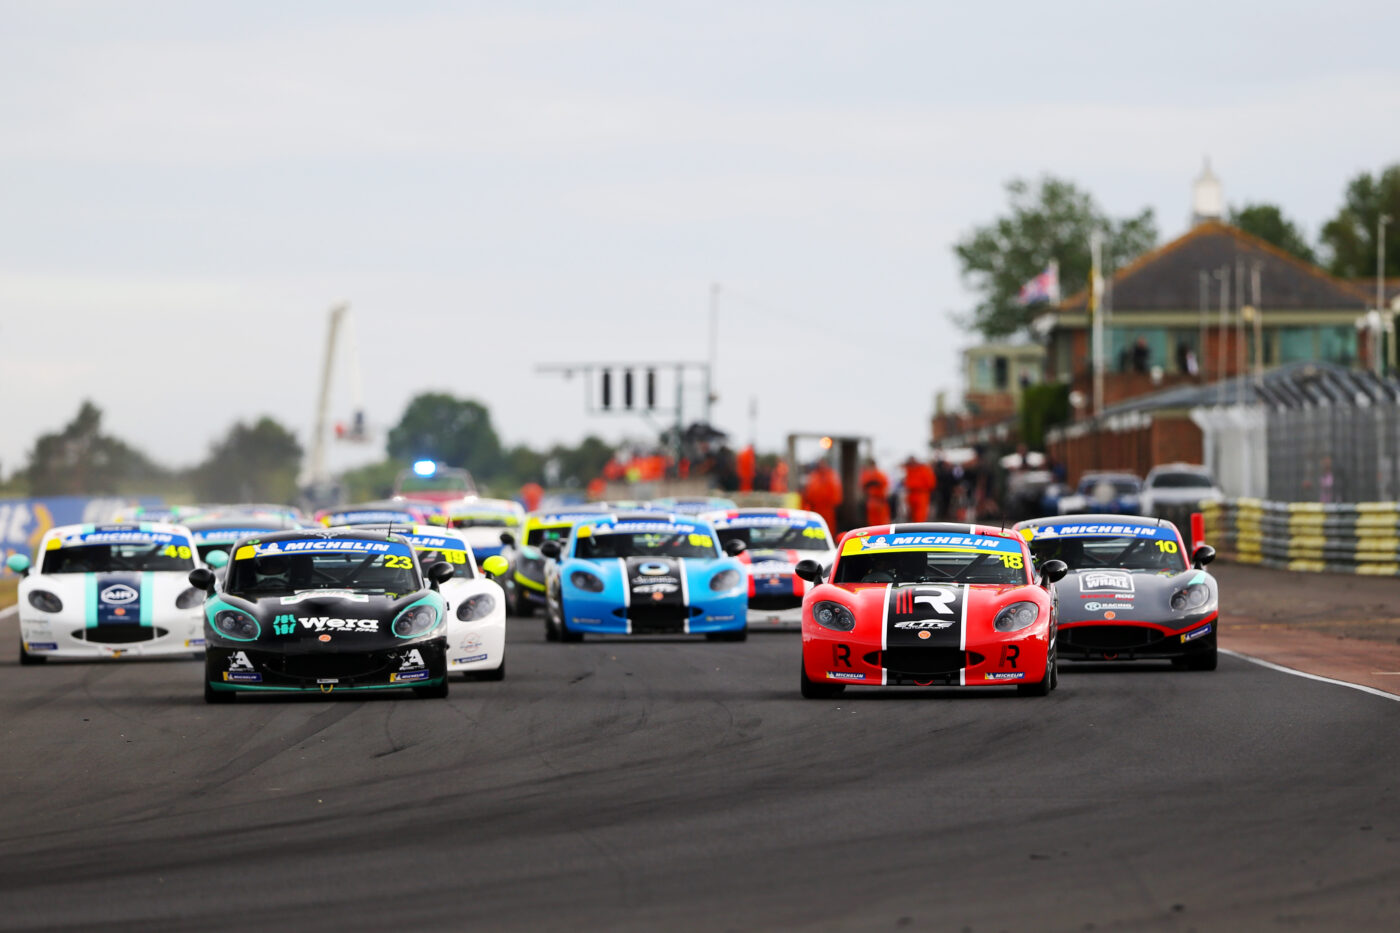 The Michelin Ginetta Junior Championship begins its eagerly awaited new era this weekend at Oulton Park